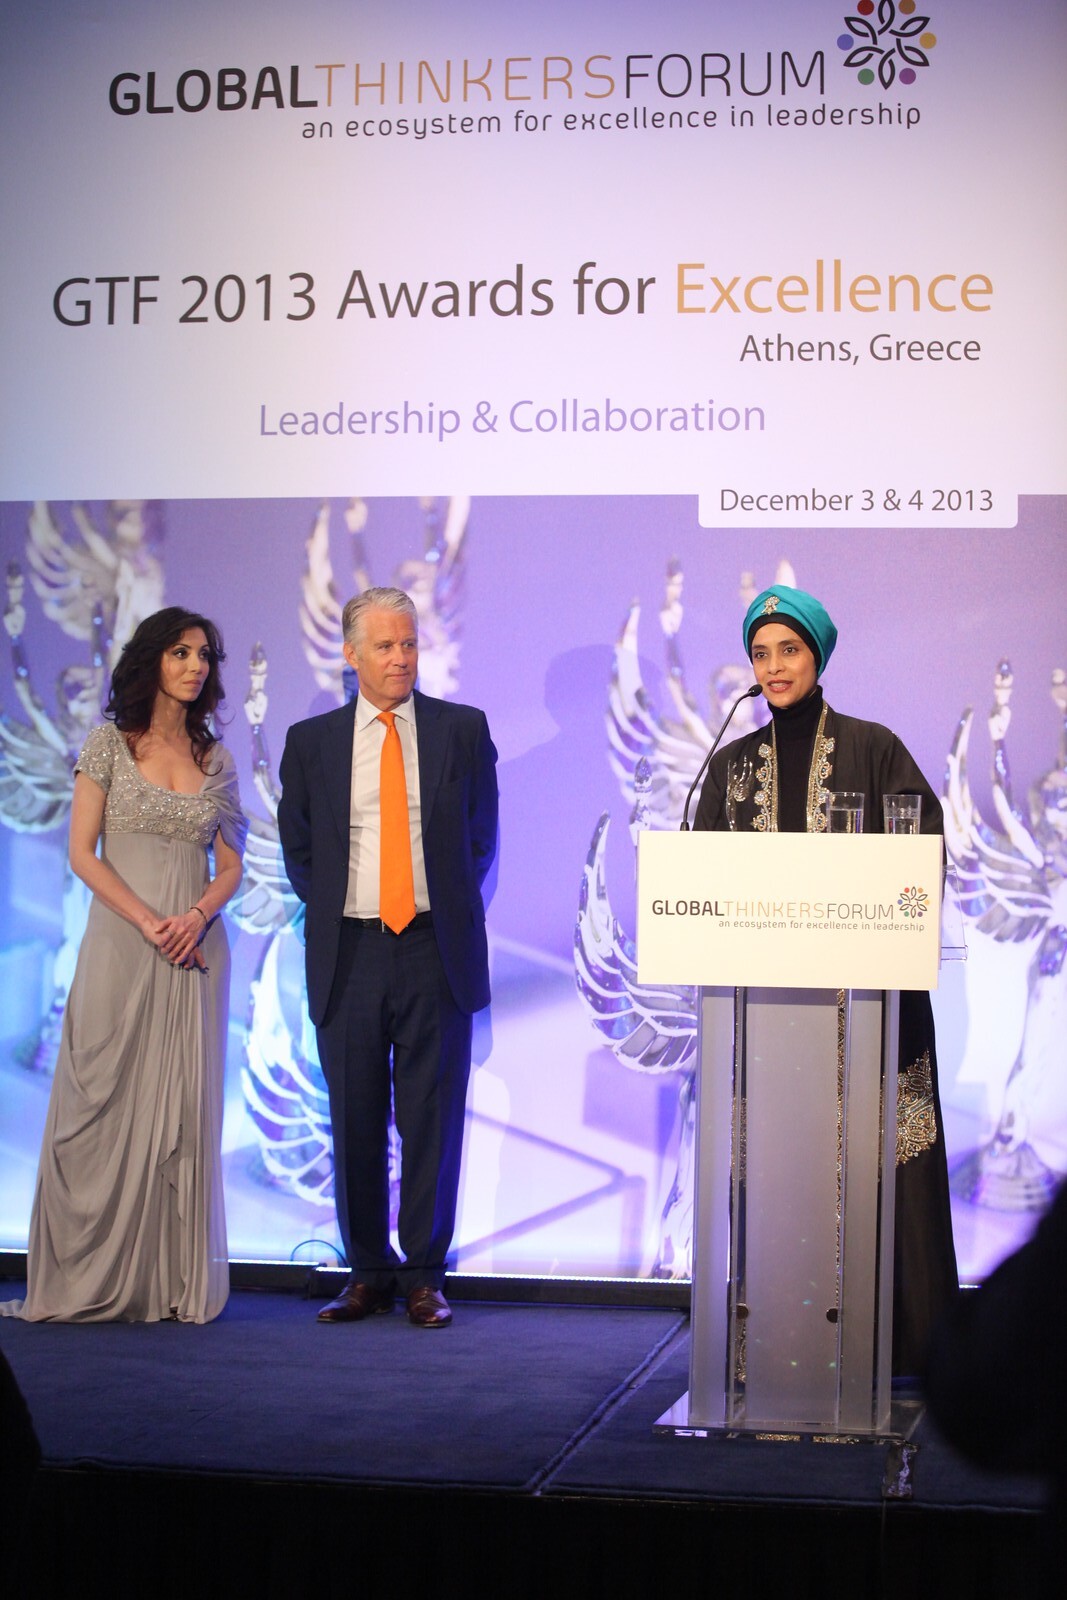 Dr Maisah Sobaihi receiving GTF 2013 Award for Excellence in Pioneering